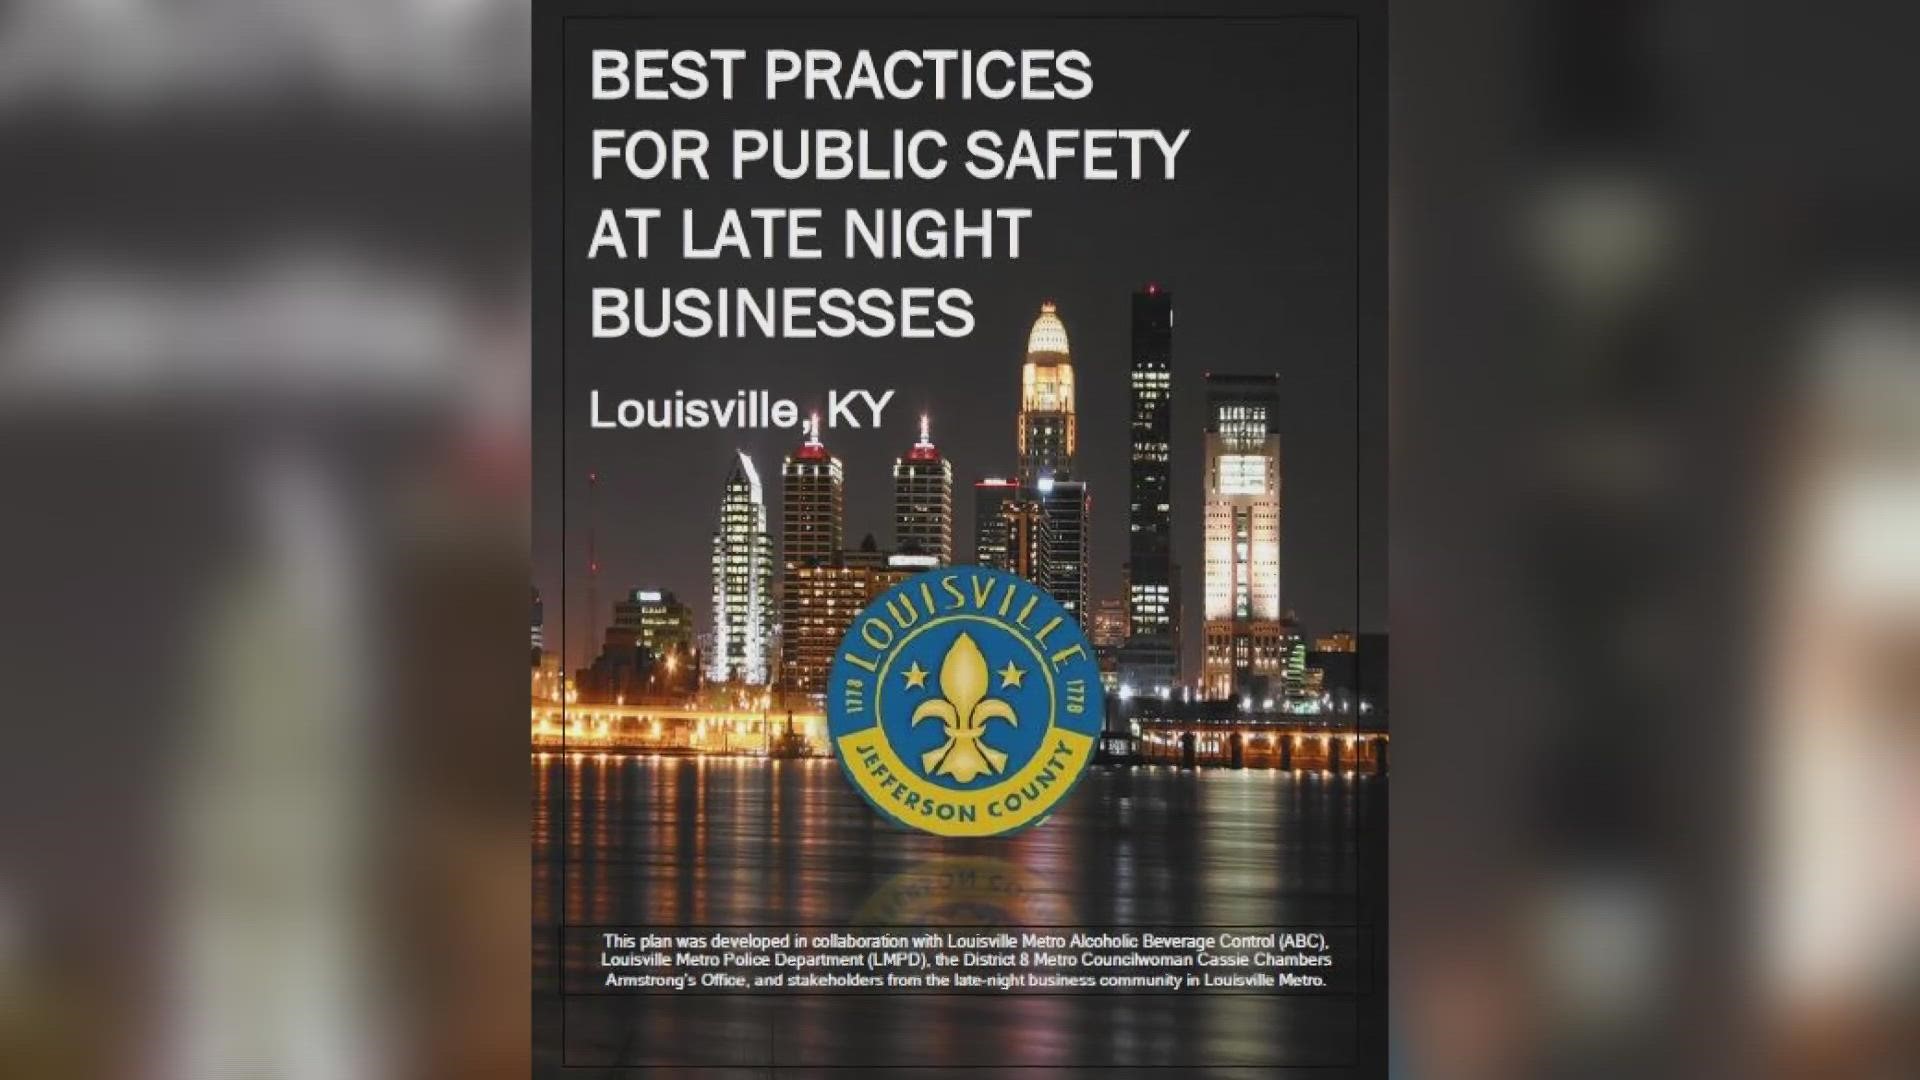 From security guards to Uber safety, the list is comprehensive. Metro Councilwoman Cassie Chambers Armstrong and law enforcement share some of the recommendations.